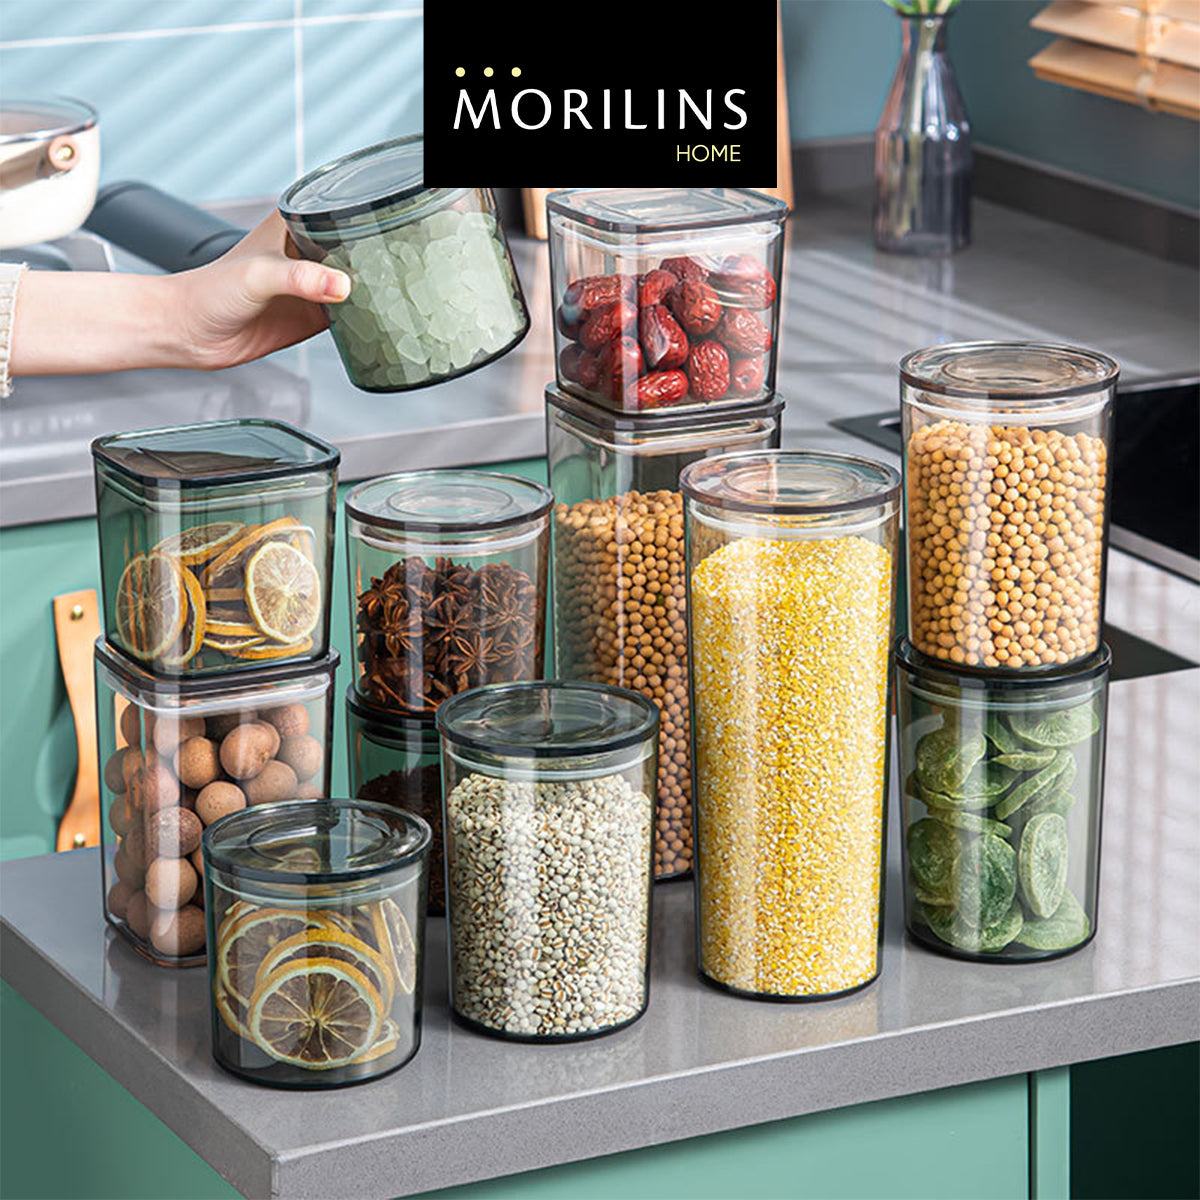 [Morilins Home] Airtight Food Storage Containers, BPA Free Plastic Food Grade Containers with silicone seal lids, for Kitchen Pantry Organization and Storage - Bloom Concept